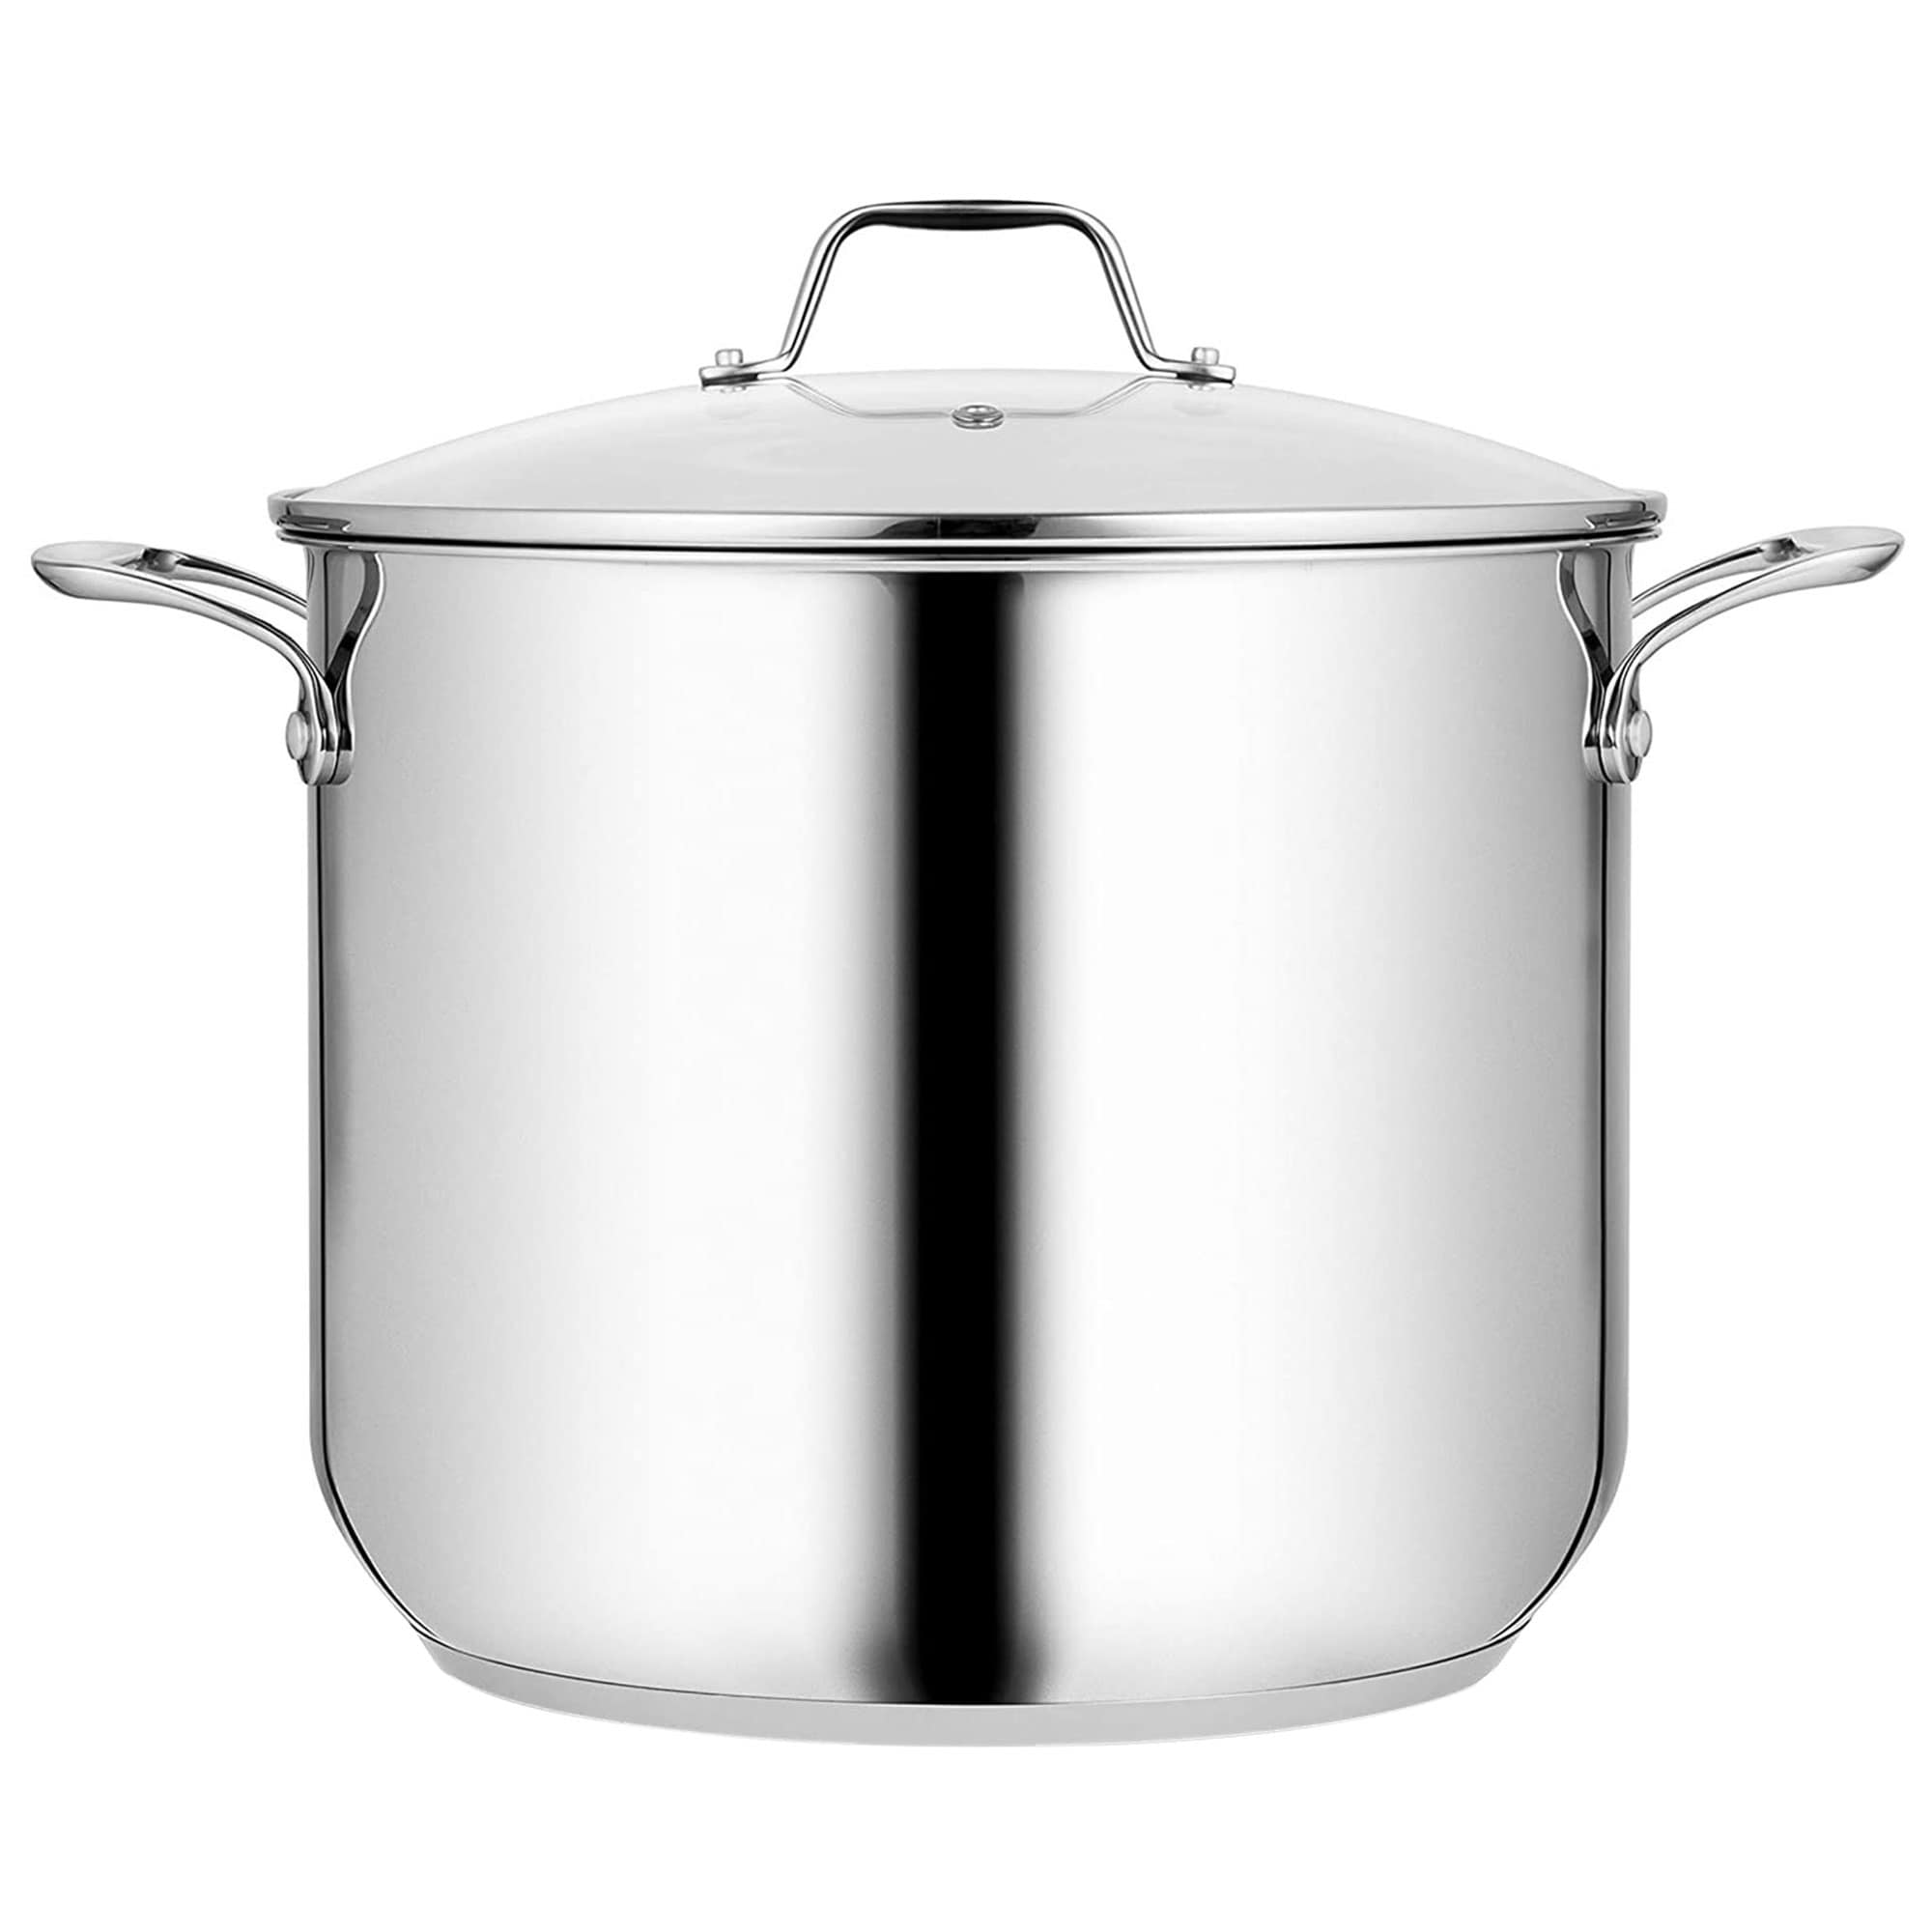 NutriChef Stainless Steel Cookware Stockpot - 14 Quart, Heavy Duty  Induction Pot, Soup Pot with Stainless Steel, Lid, Induction, Ceramic,  Glass and